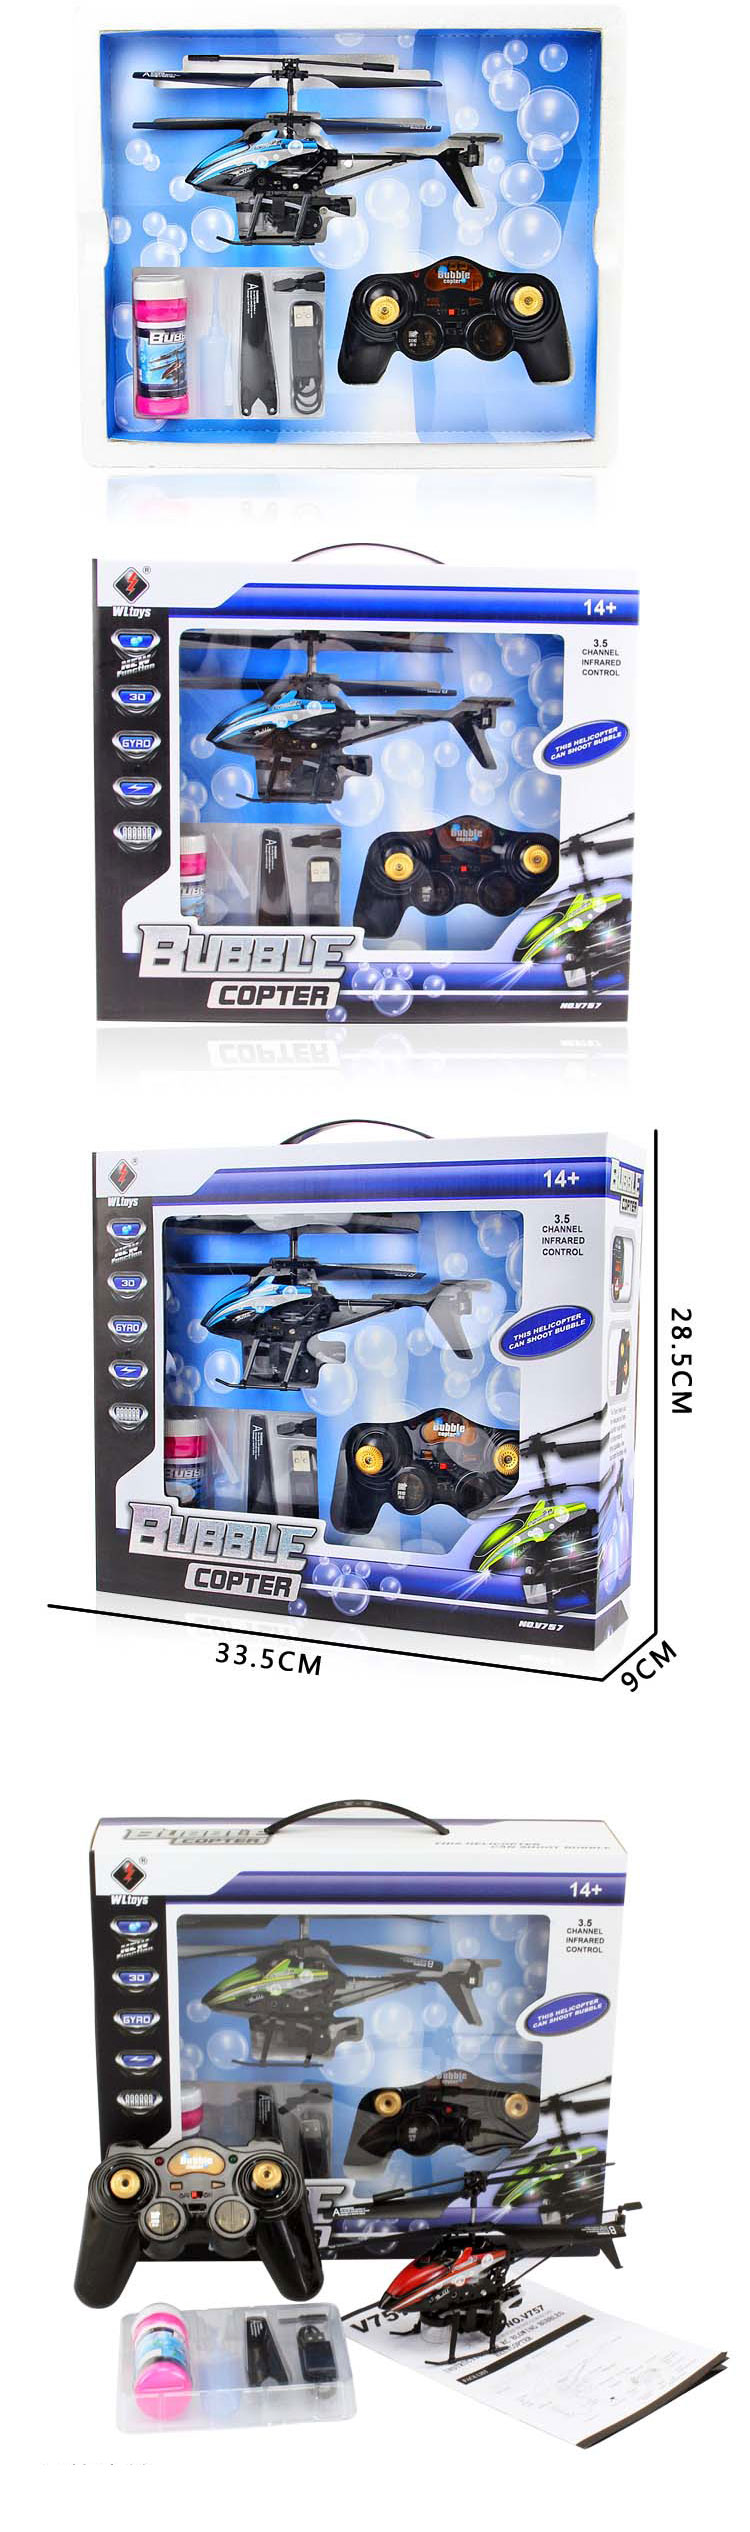 WL V757 Blow Bubbles RC Helicopter